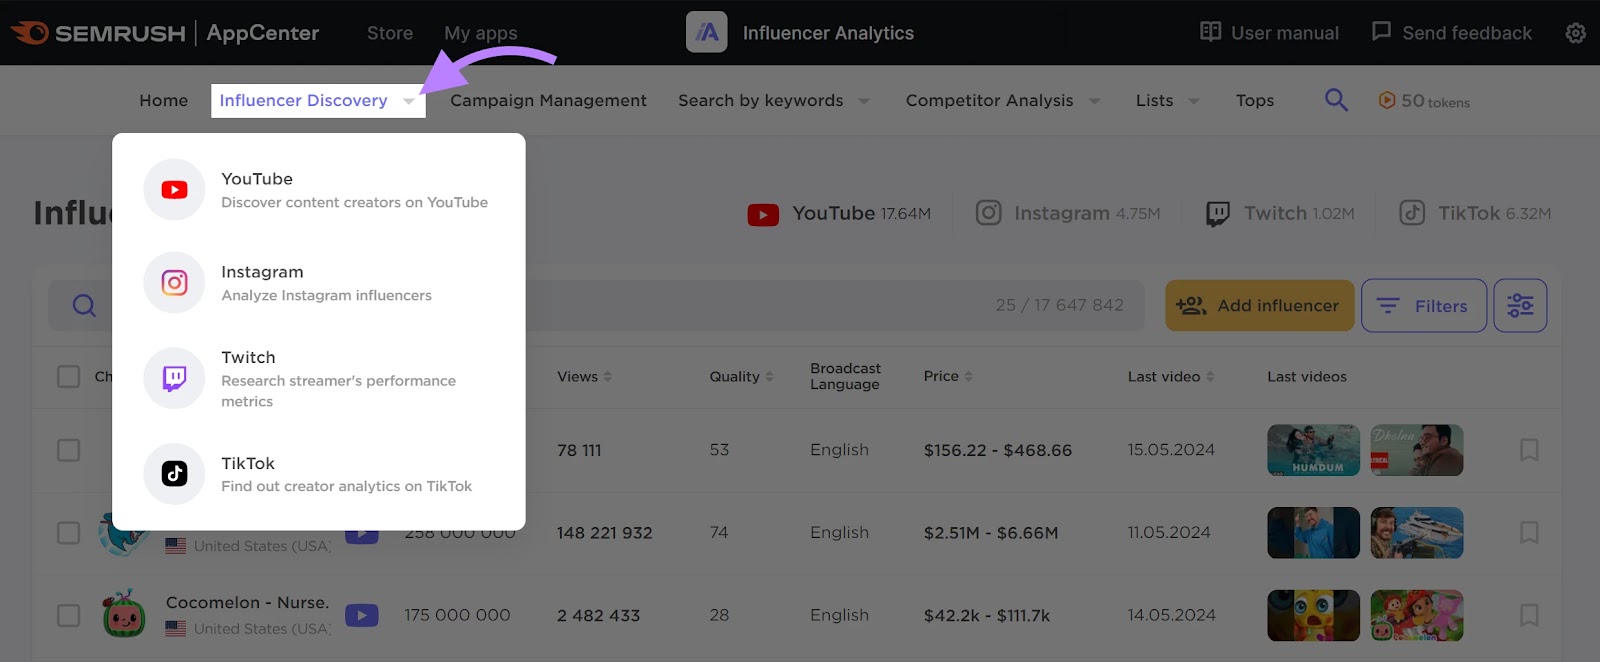 Influencer Analytics tool with the "Influencer Discovery" drop-down menu open.